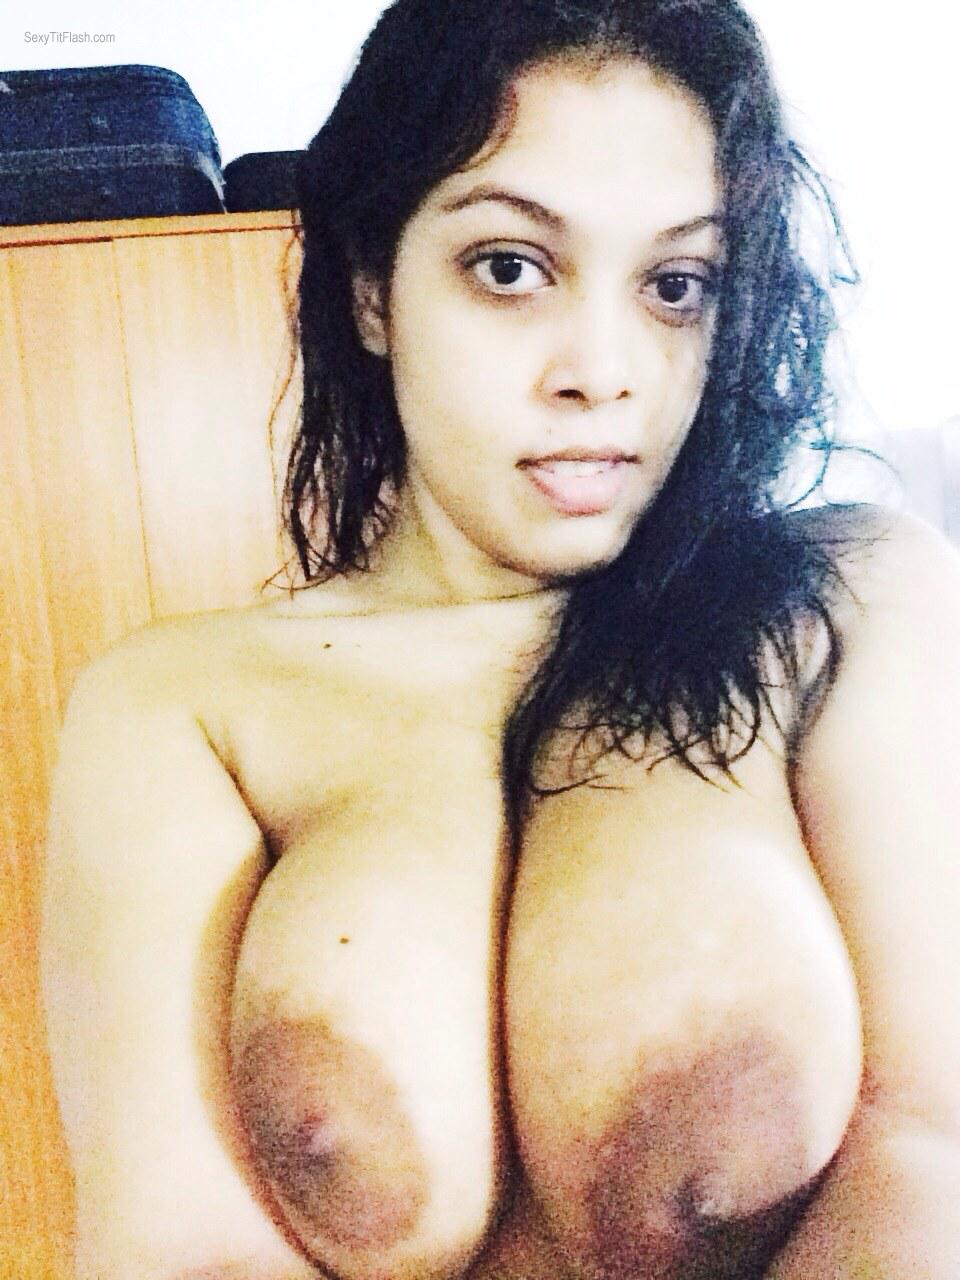 Tit Flash: Wife's Very Big Tits With Very Strong Tanlines (Selfie) - Topless Hun from Mexico